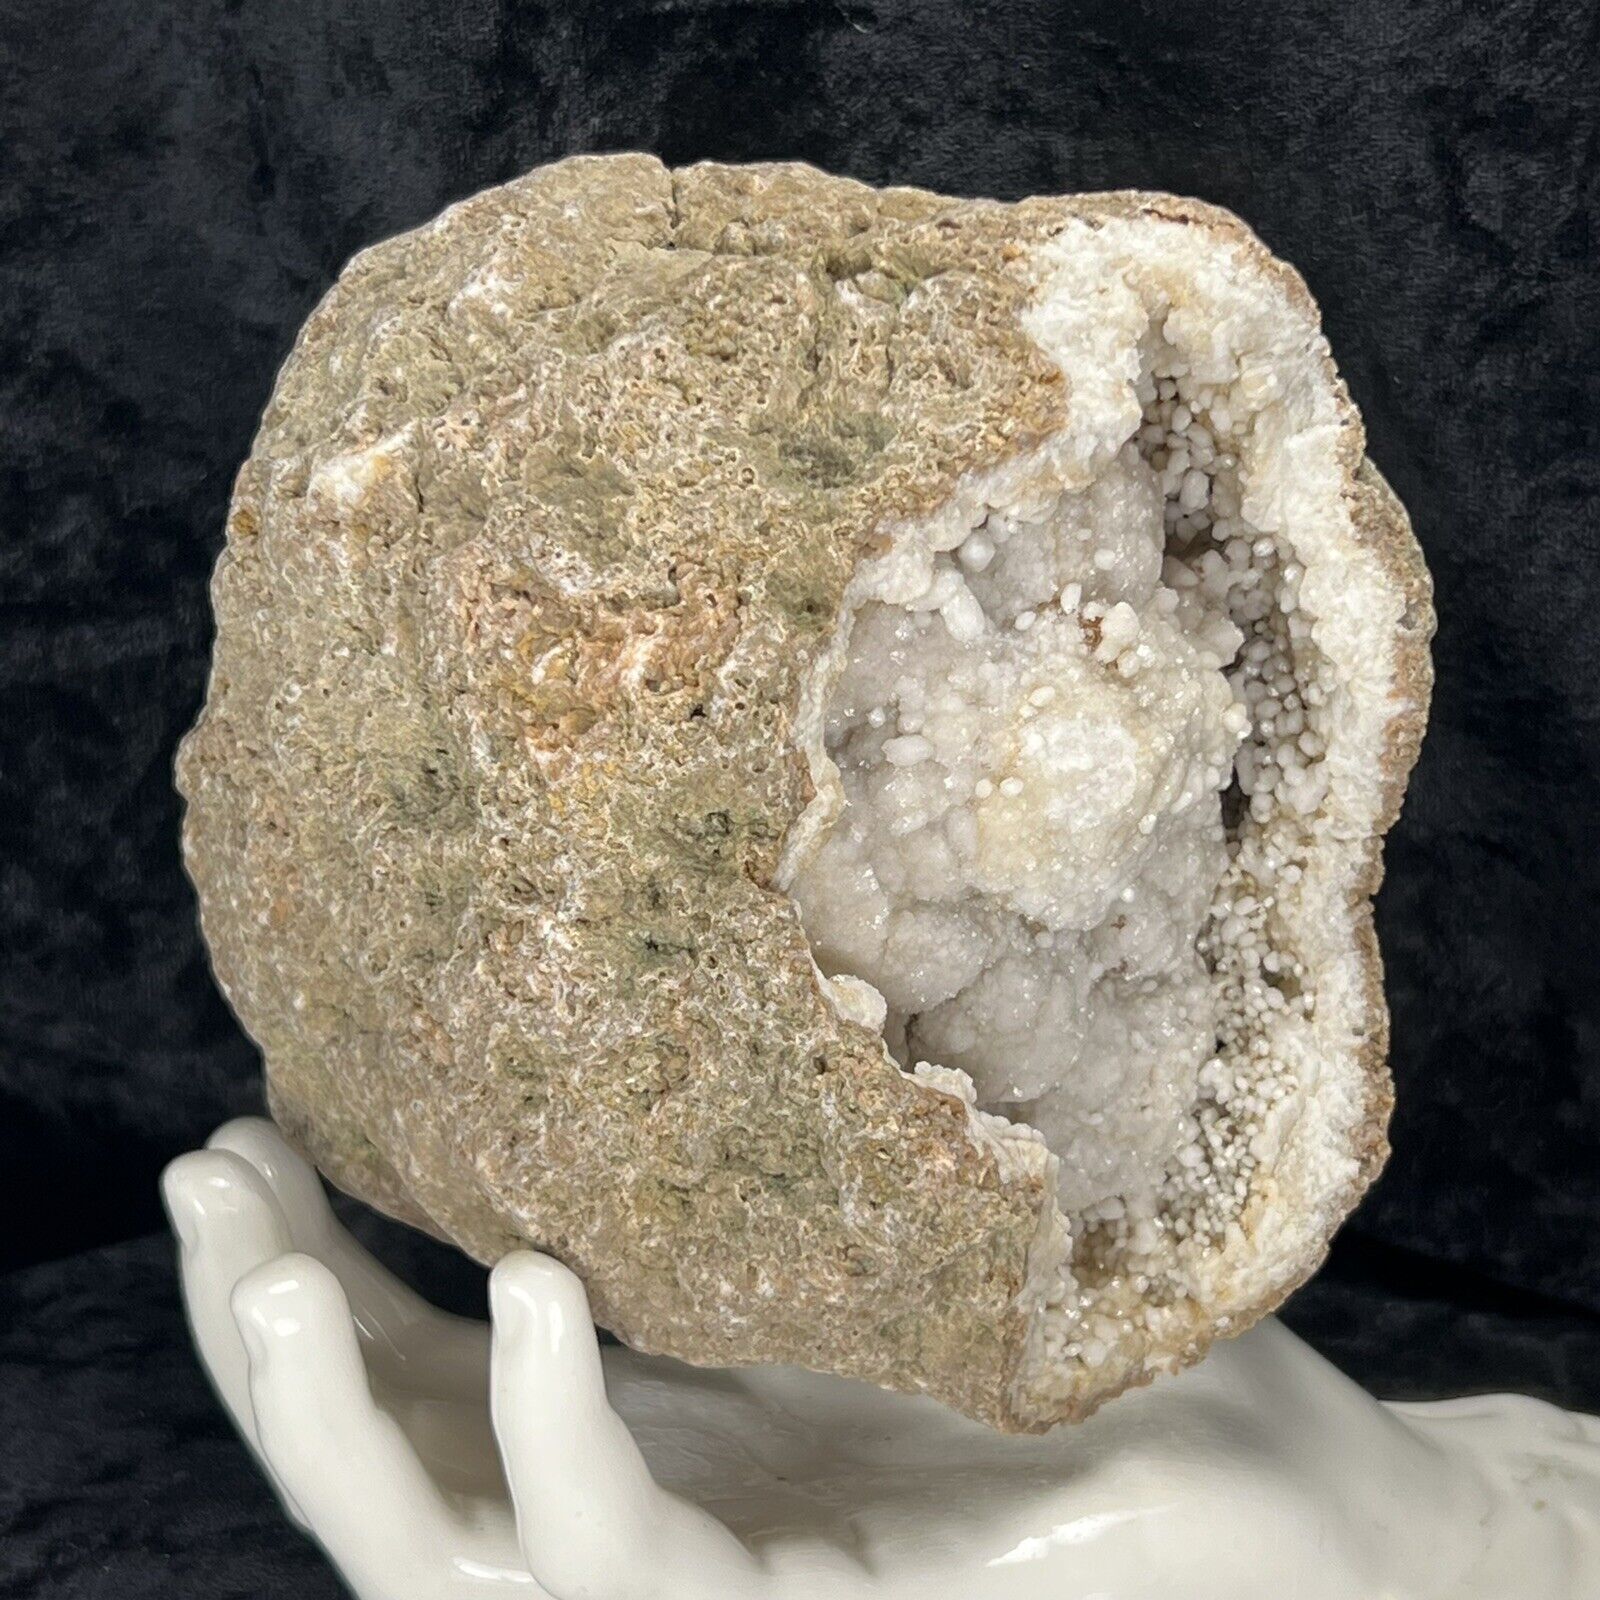 5” Unique Crystal Big Snowball Cluster Geode Unopened Natural Kentucky 4.3Lb